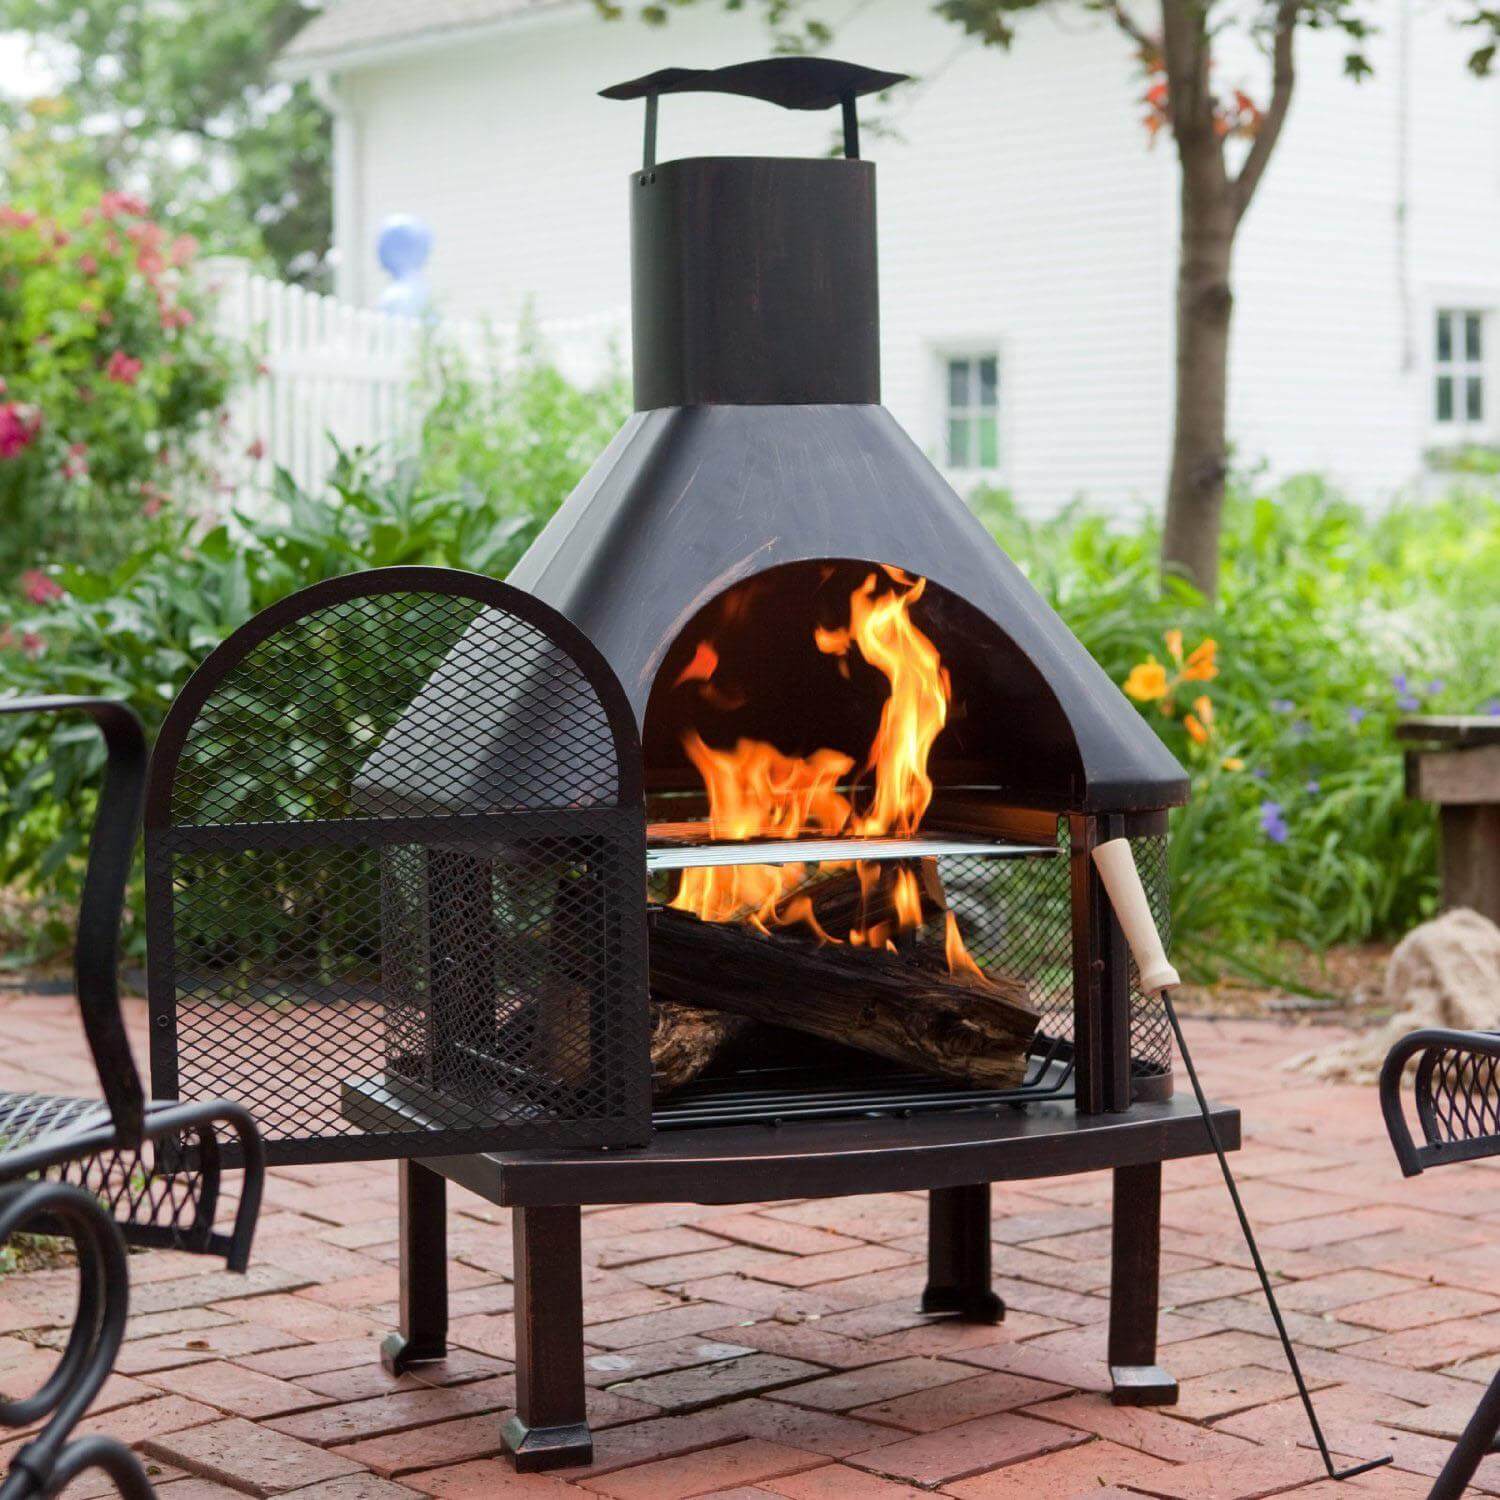 20 Cool Metal Fire Pit Designs to Warm Up Your Backyard or Patio
